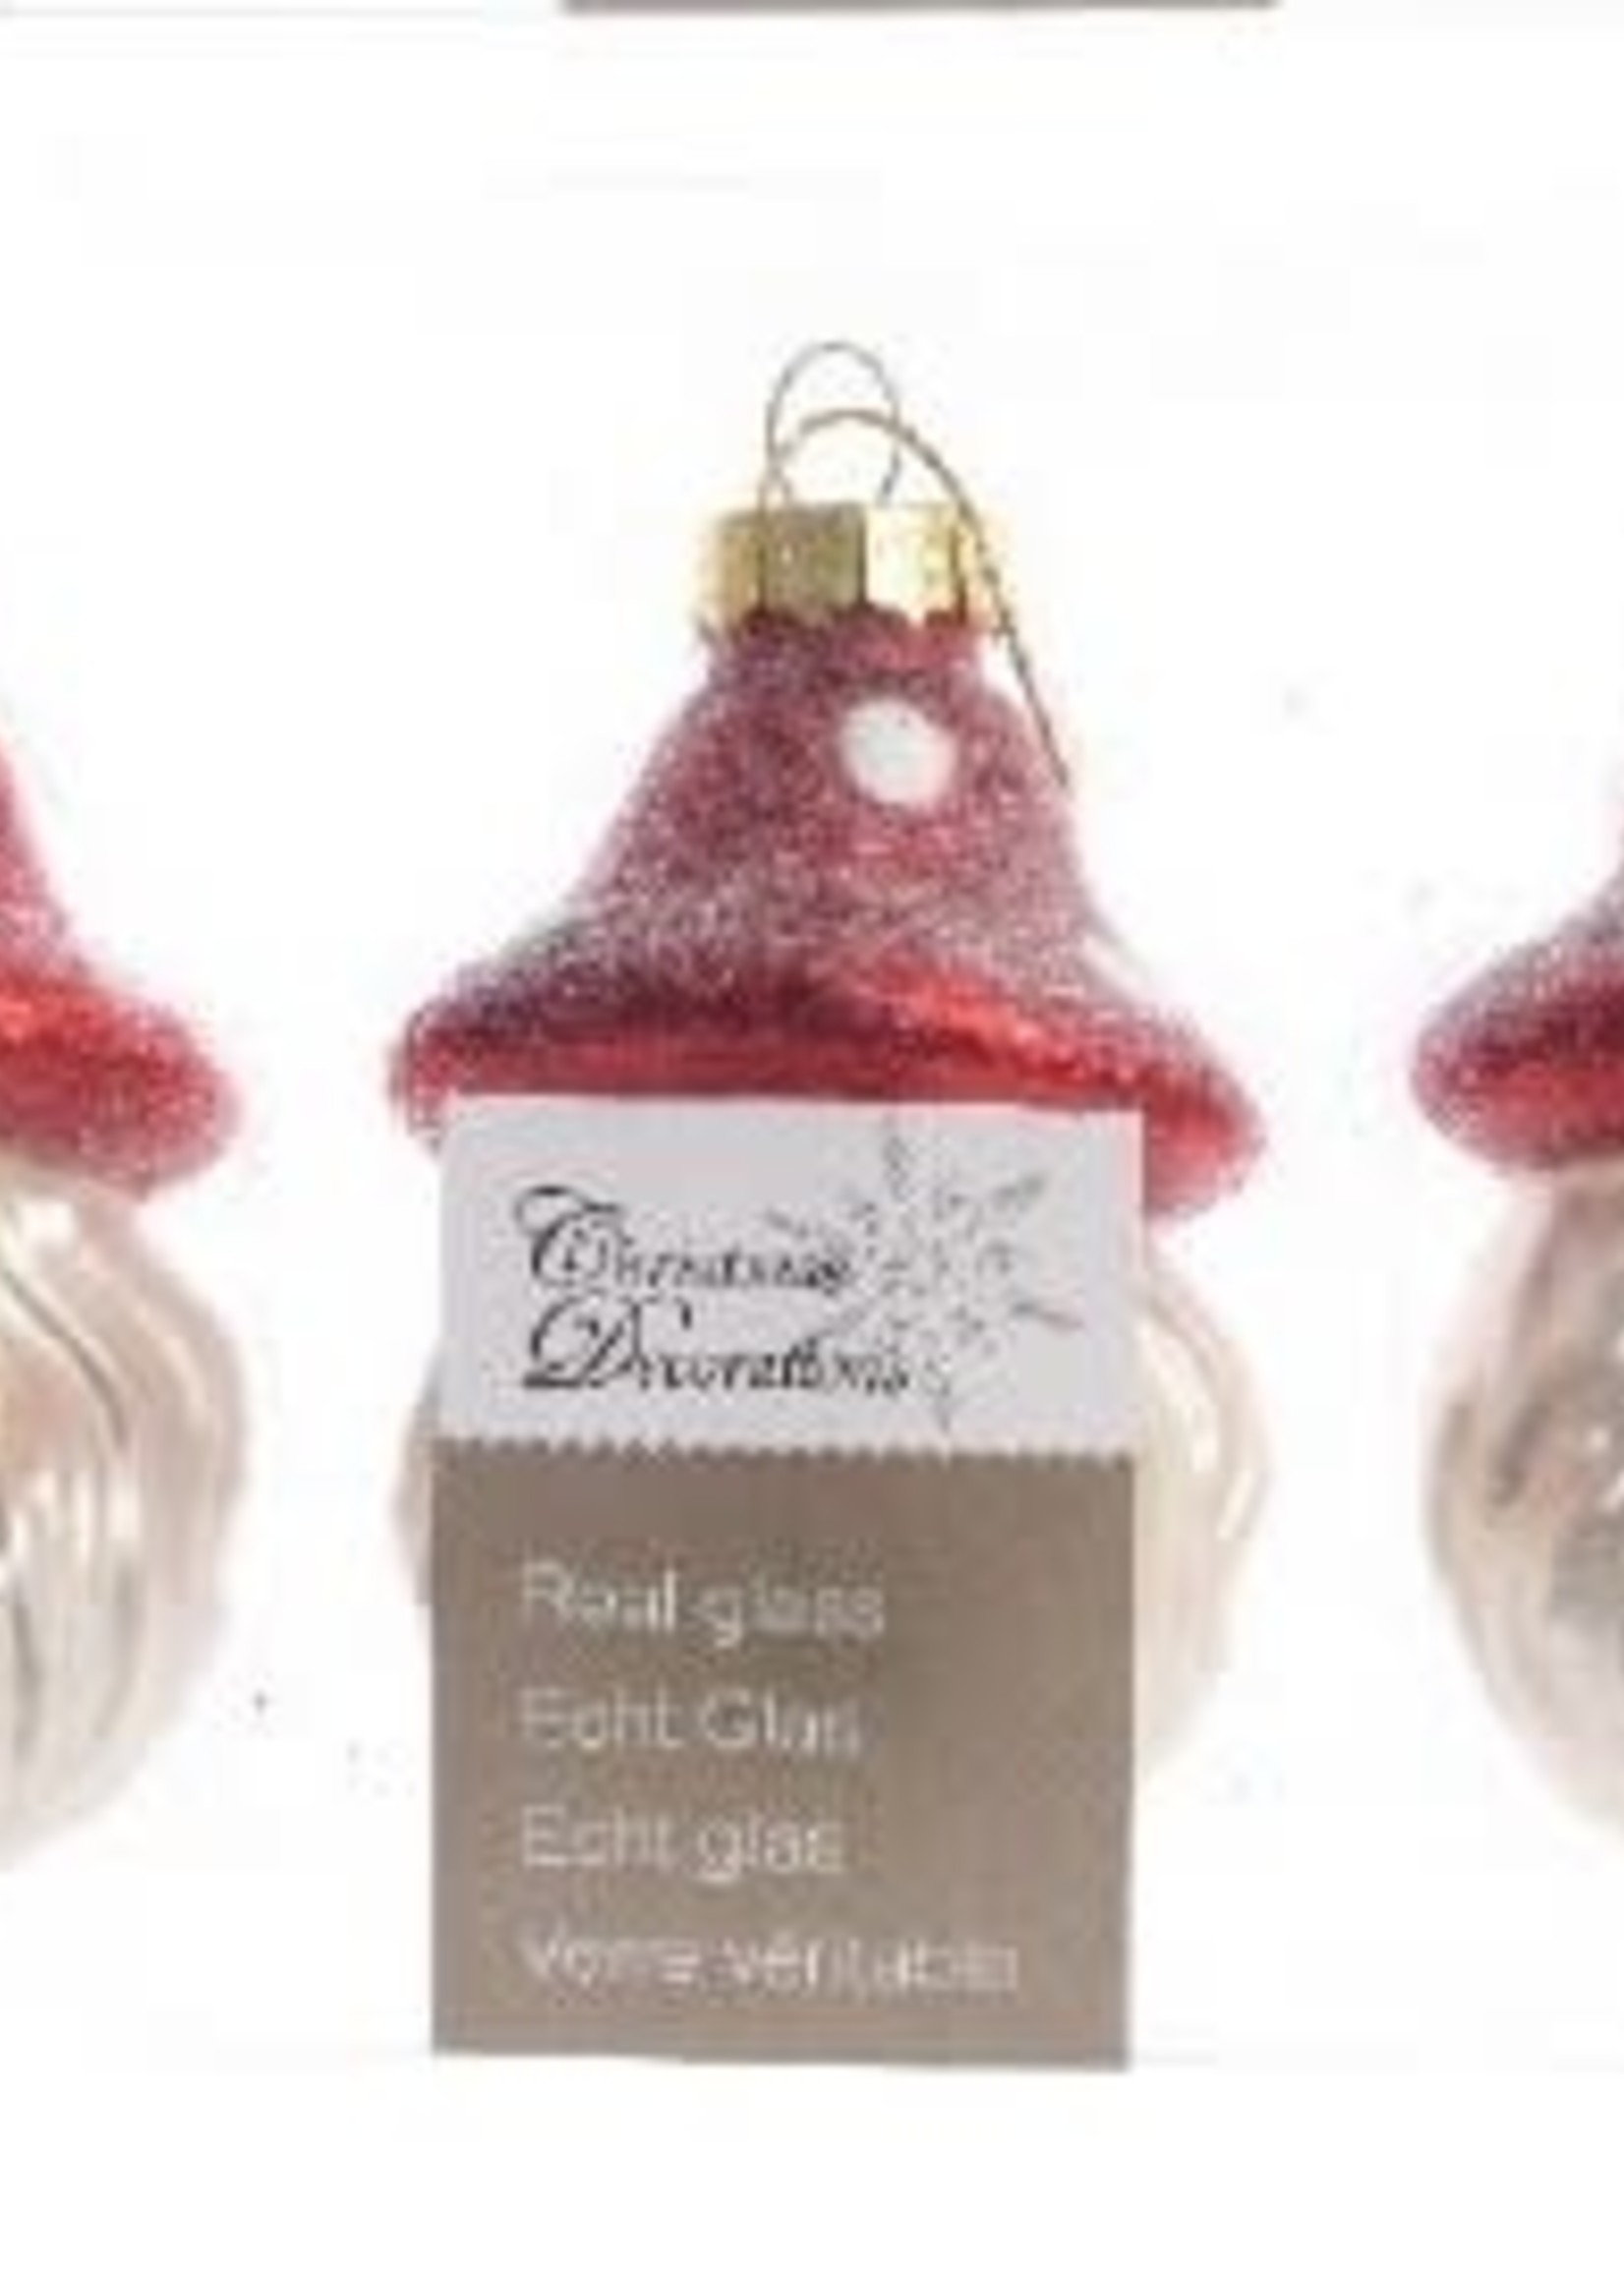 Decoris Santa  bauble with short red toadstool hat 3 pack